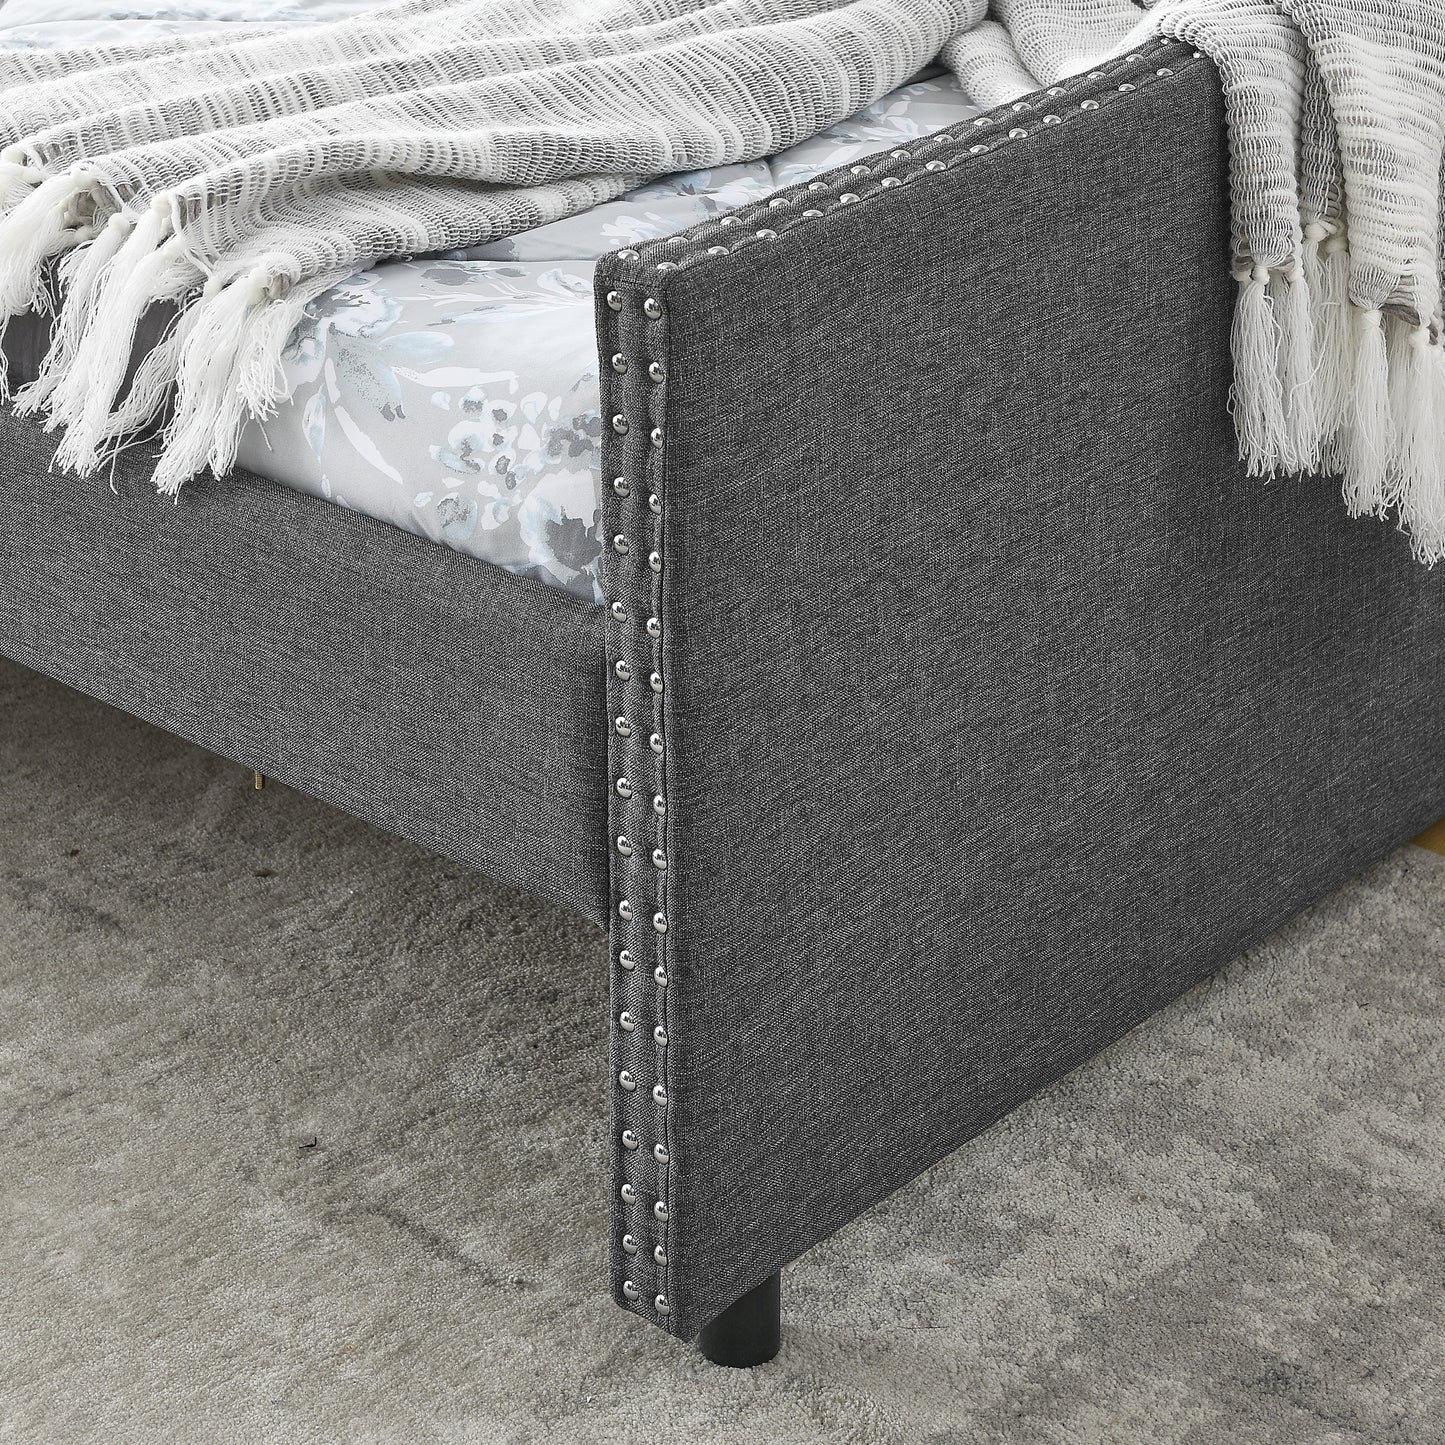 morgan upholstered daybed/sofa bed with drawers